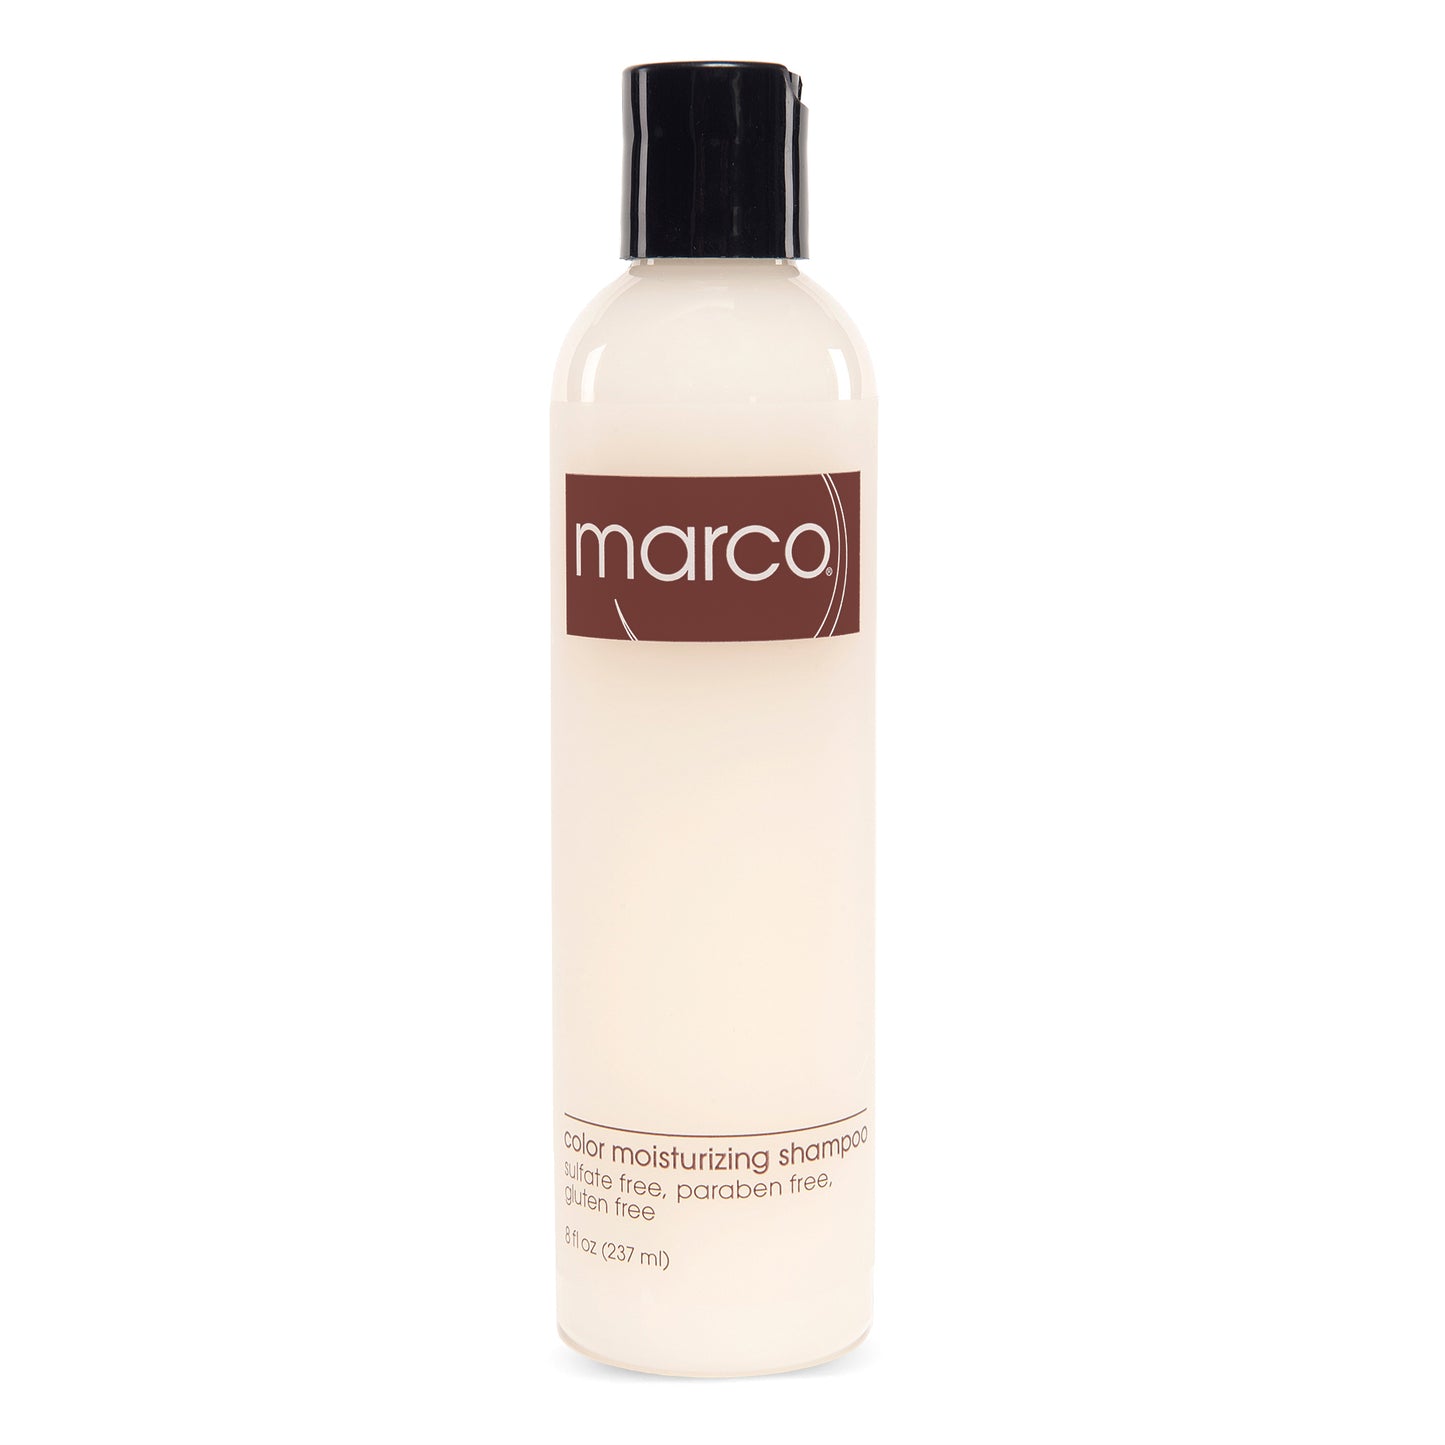 Clear bottle, translucent white product, “marco, color moisturizing shampoo, sulfate free, paraben free, gluten free”